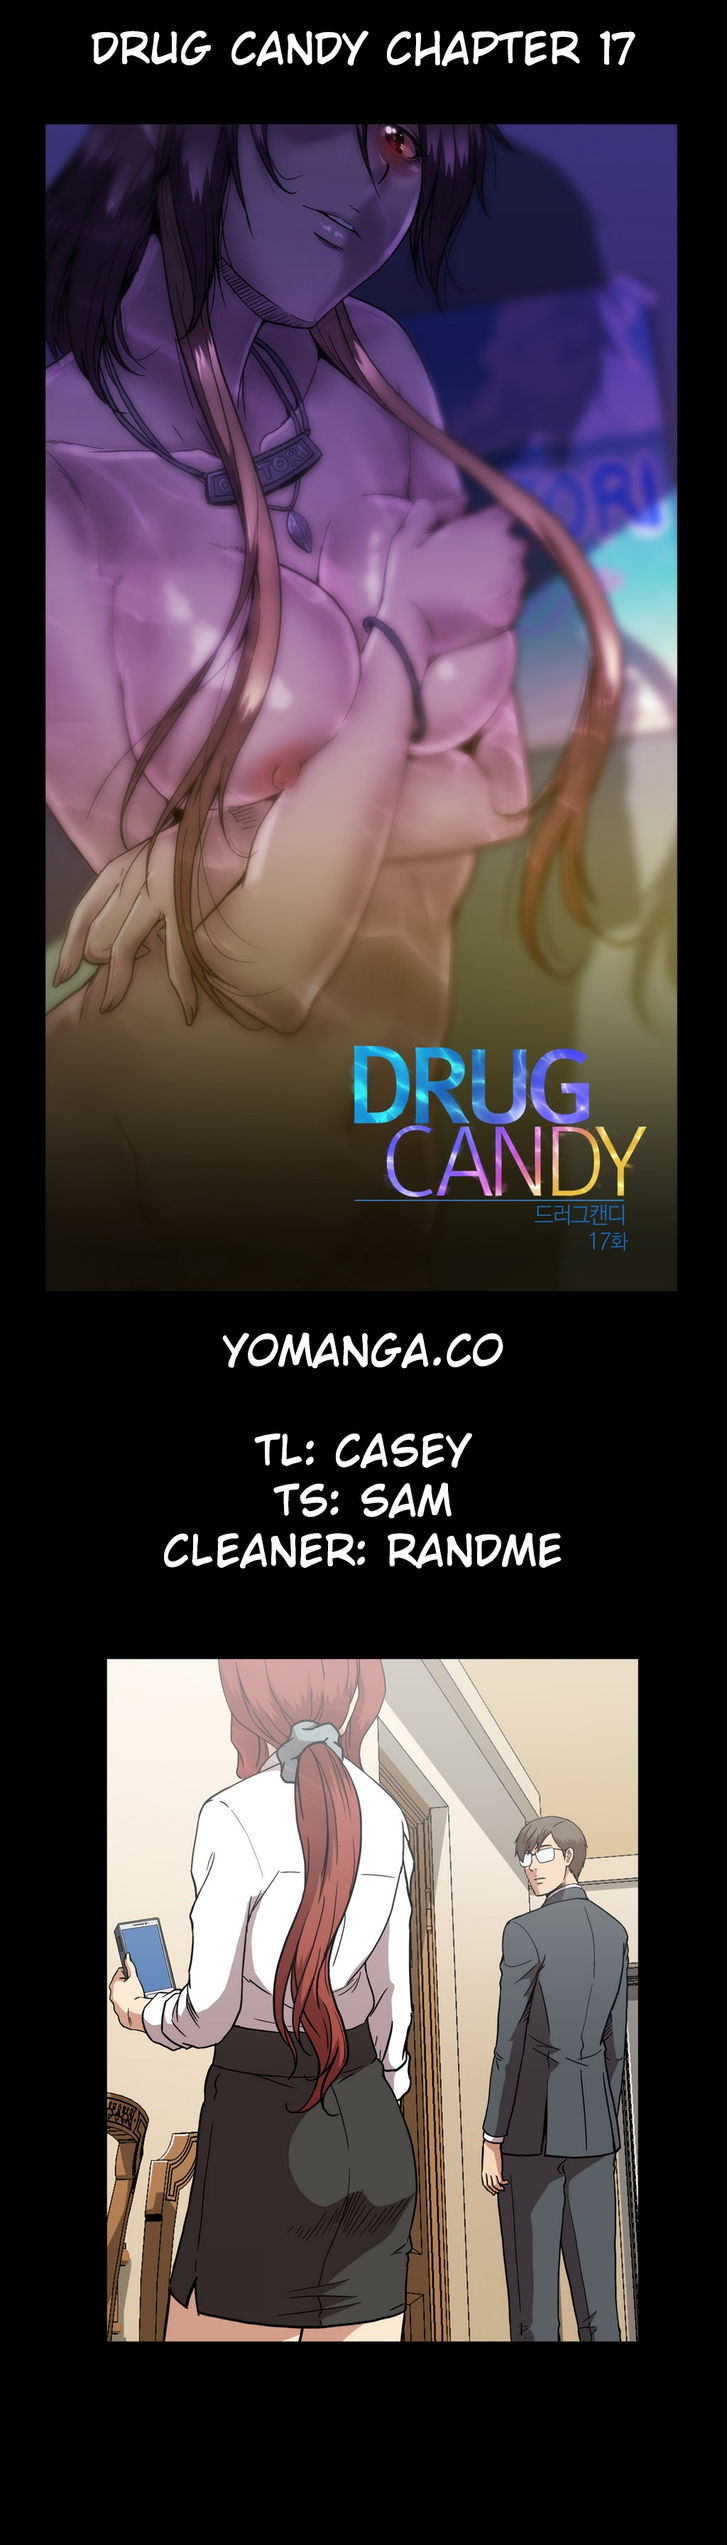 Drug Candy - Chapter 17 Page 1